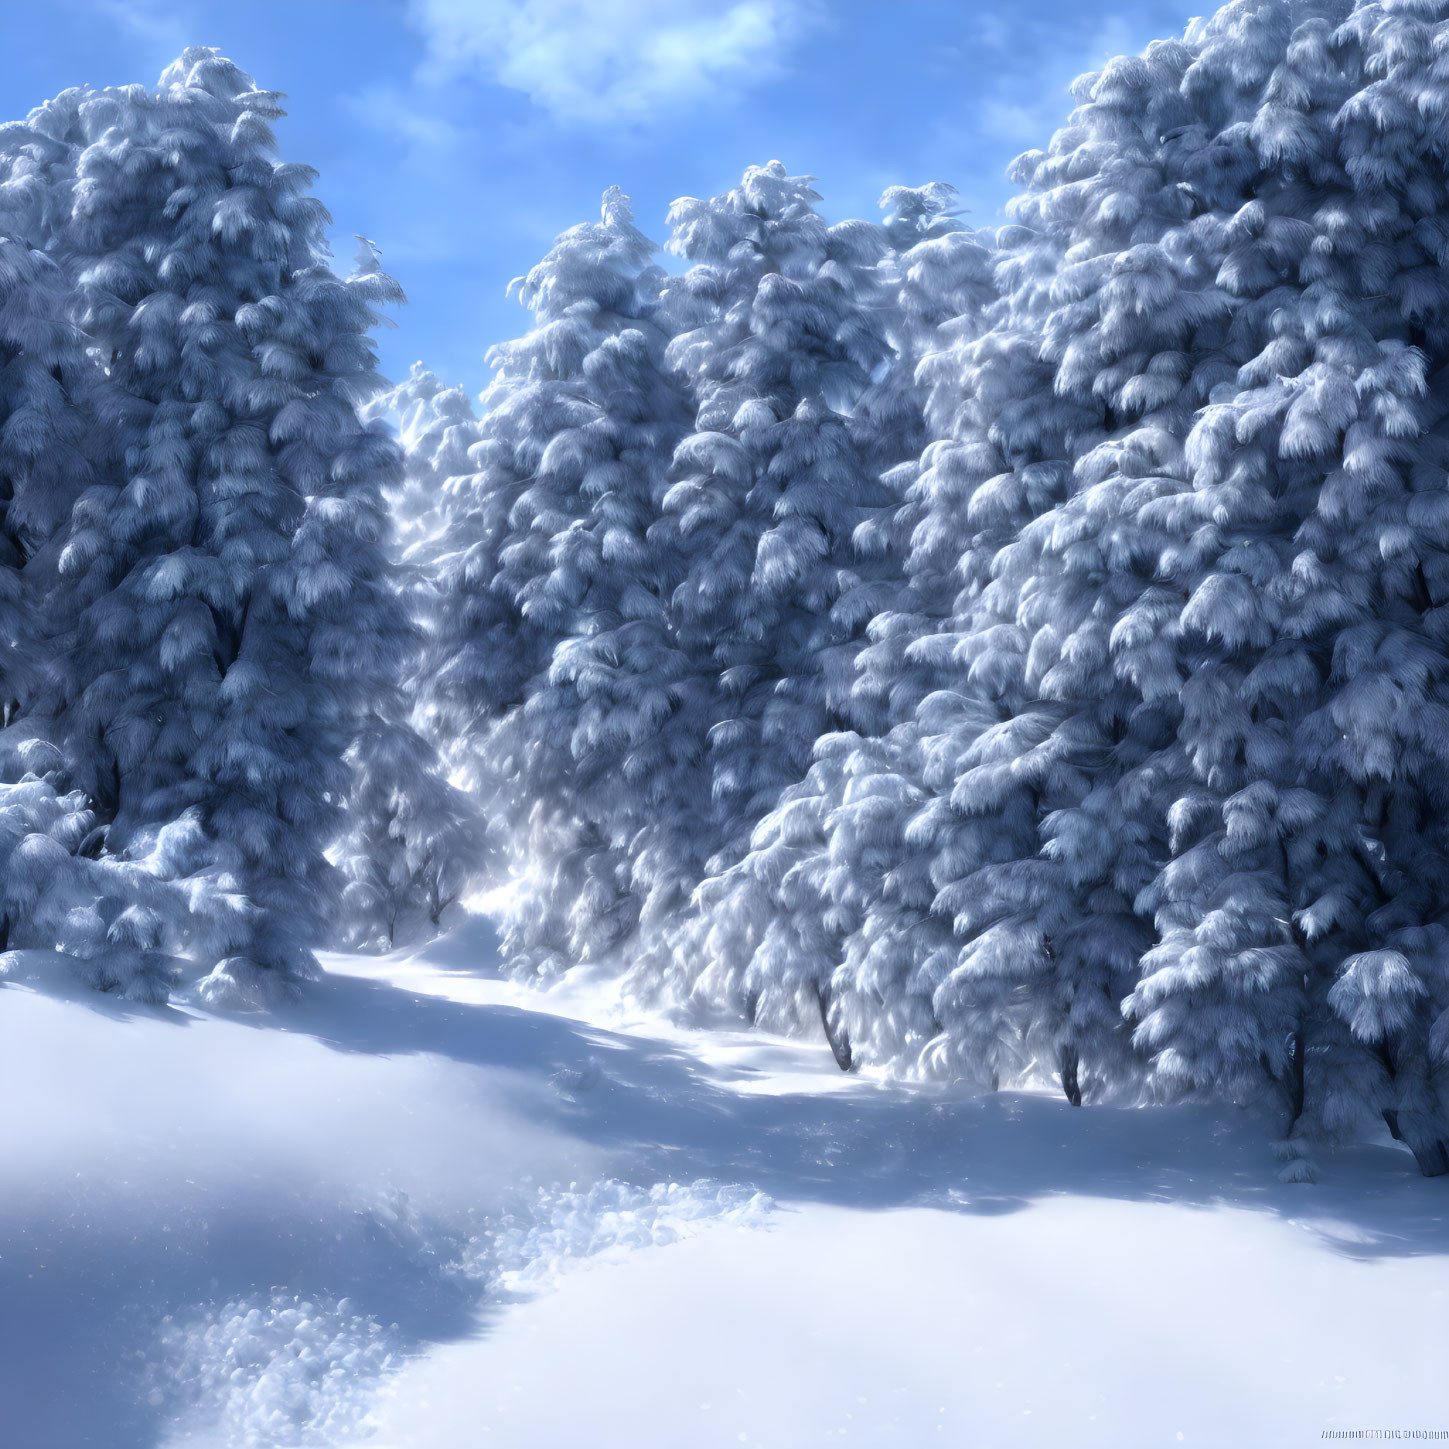 Snow-covered pine trees in serene wintry landscape